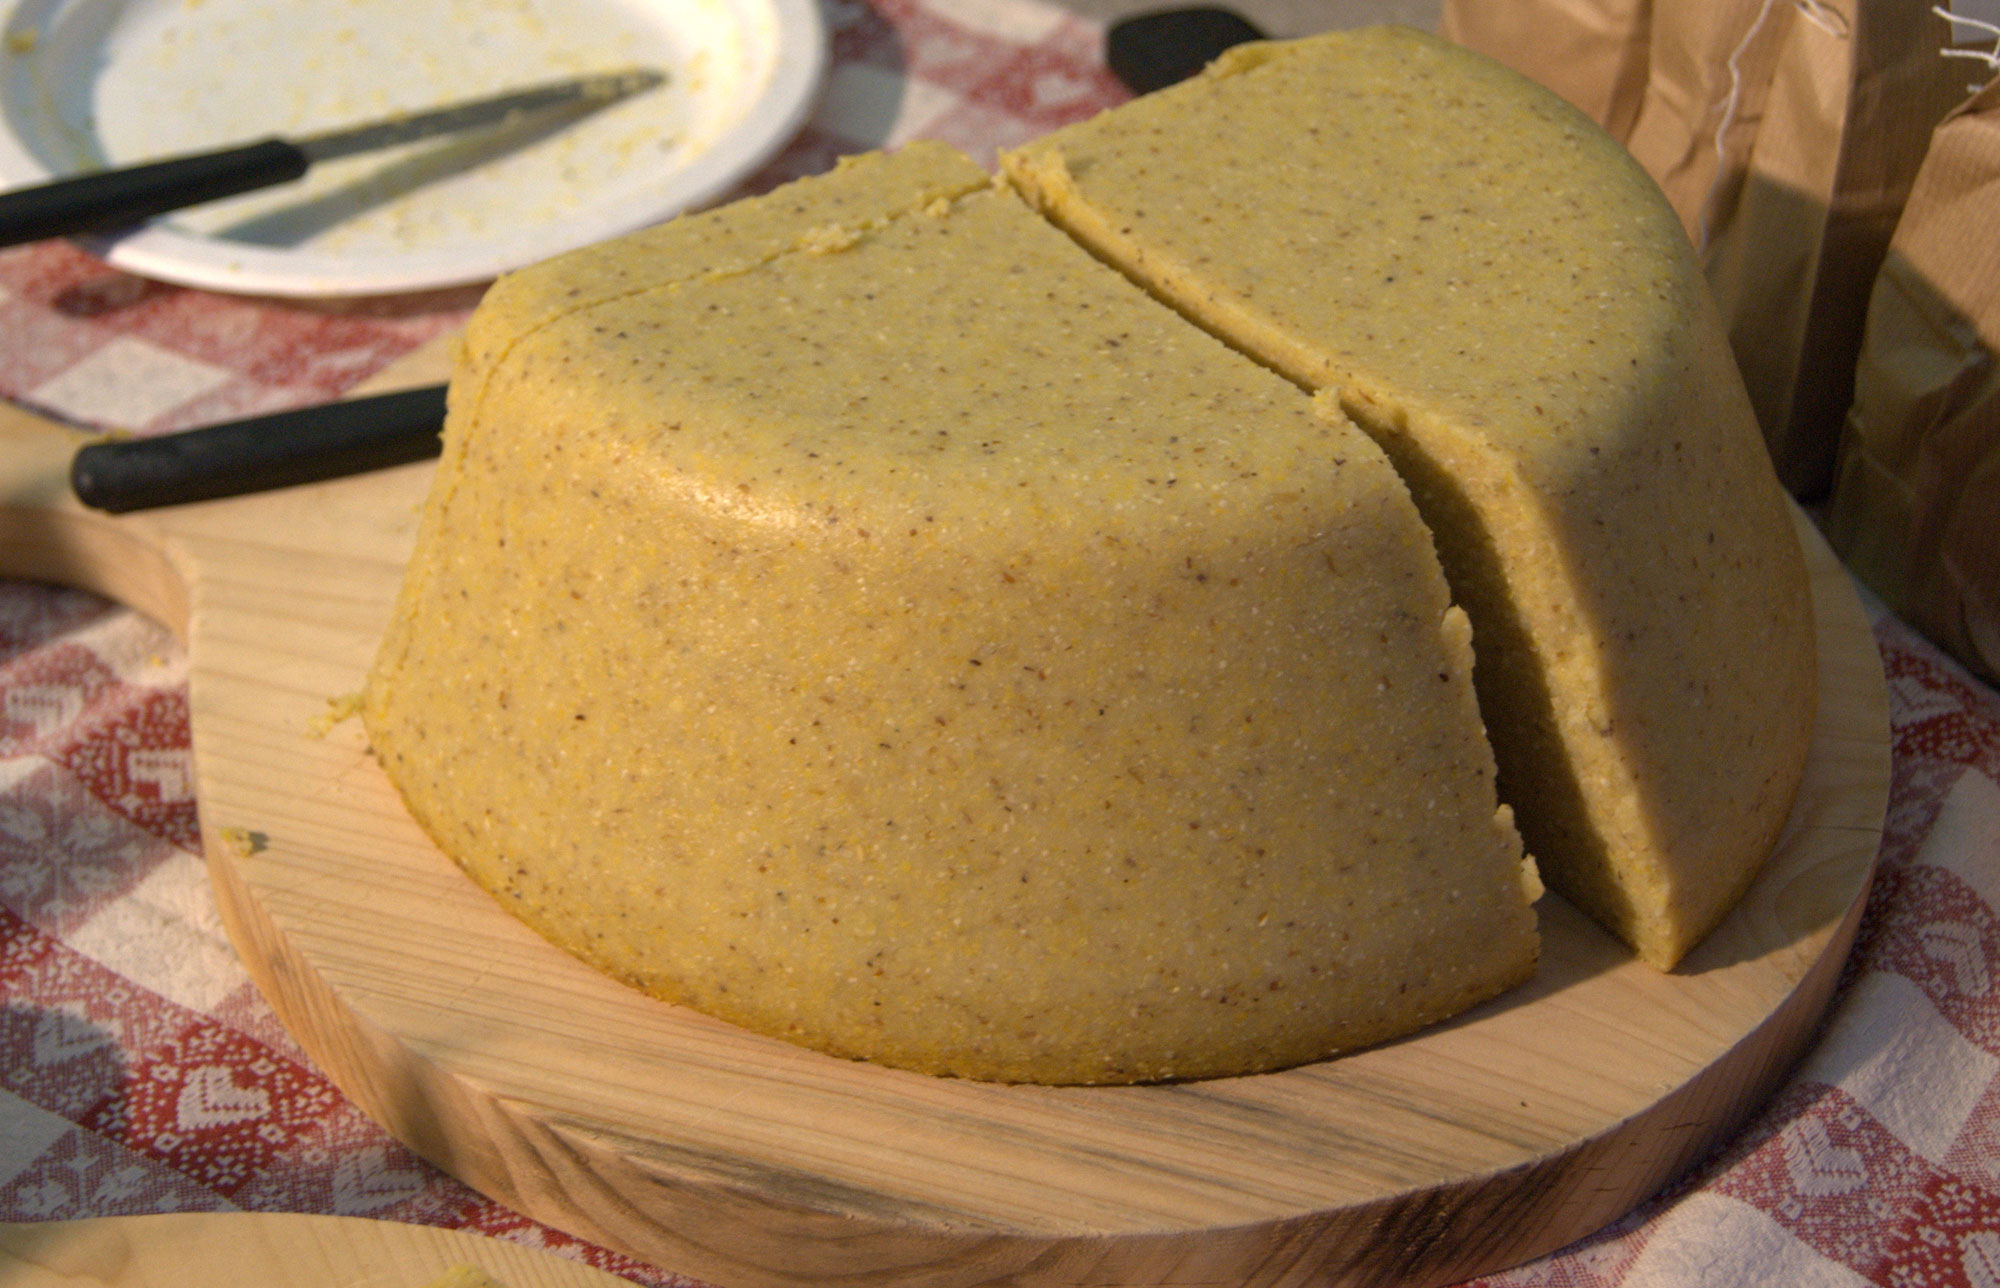 Photograph of polenta. The photo sows half of a round cake of polenta sitting on a wooden cutting board. The polenta has been cut into two halves, with a thinner slice also cut from the side not facing the viewer.